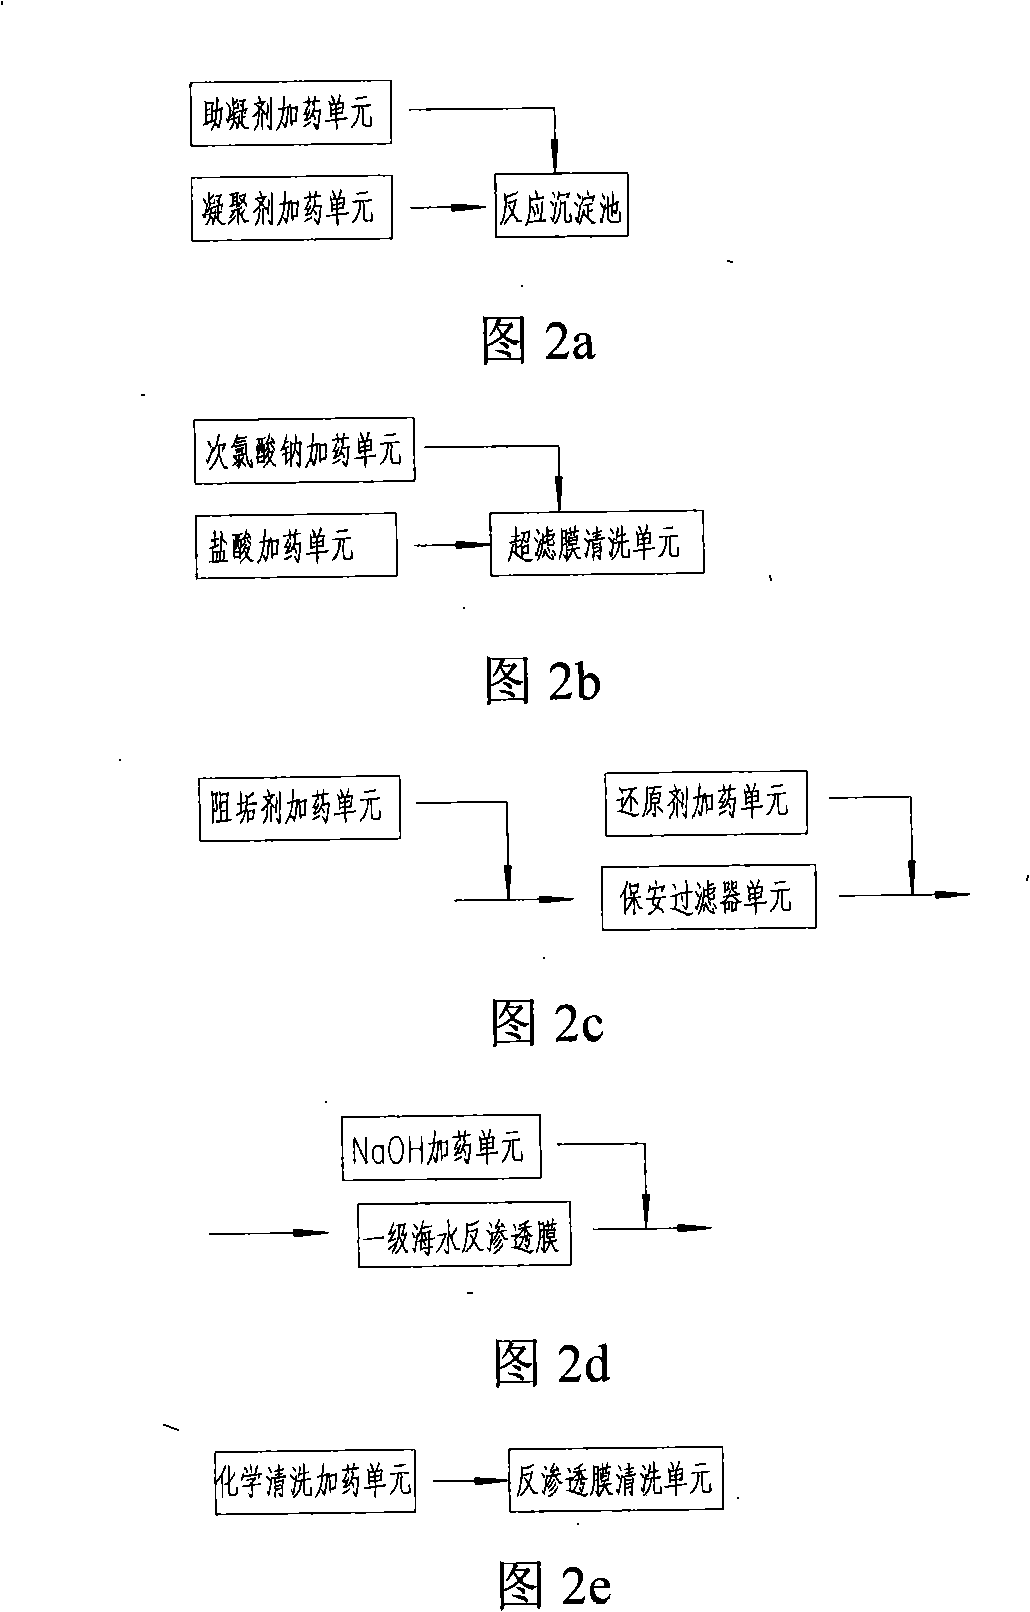 Method and apparatus for preparing ultrapure water by sea water desalination